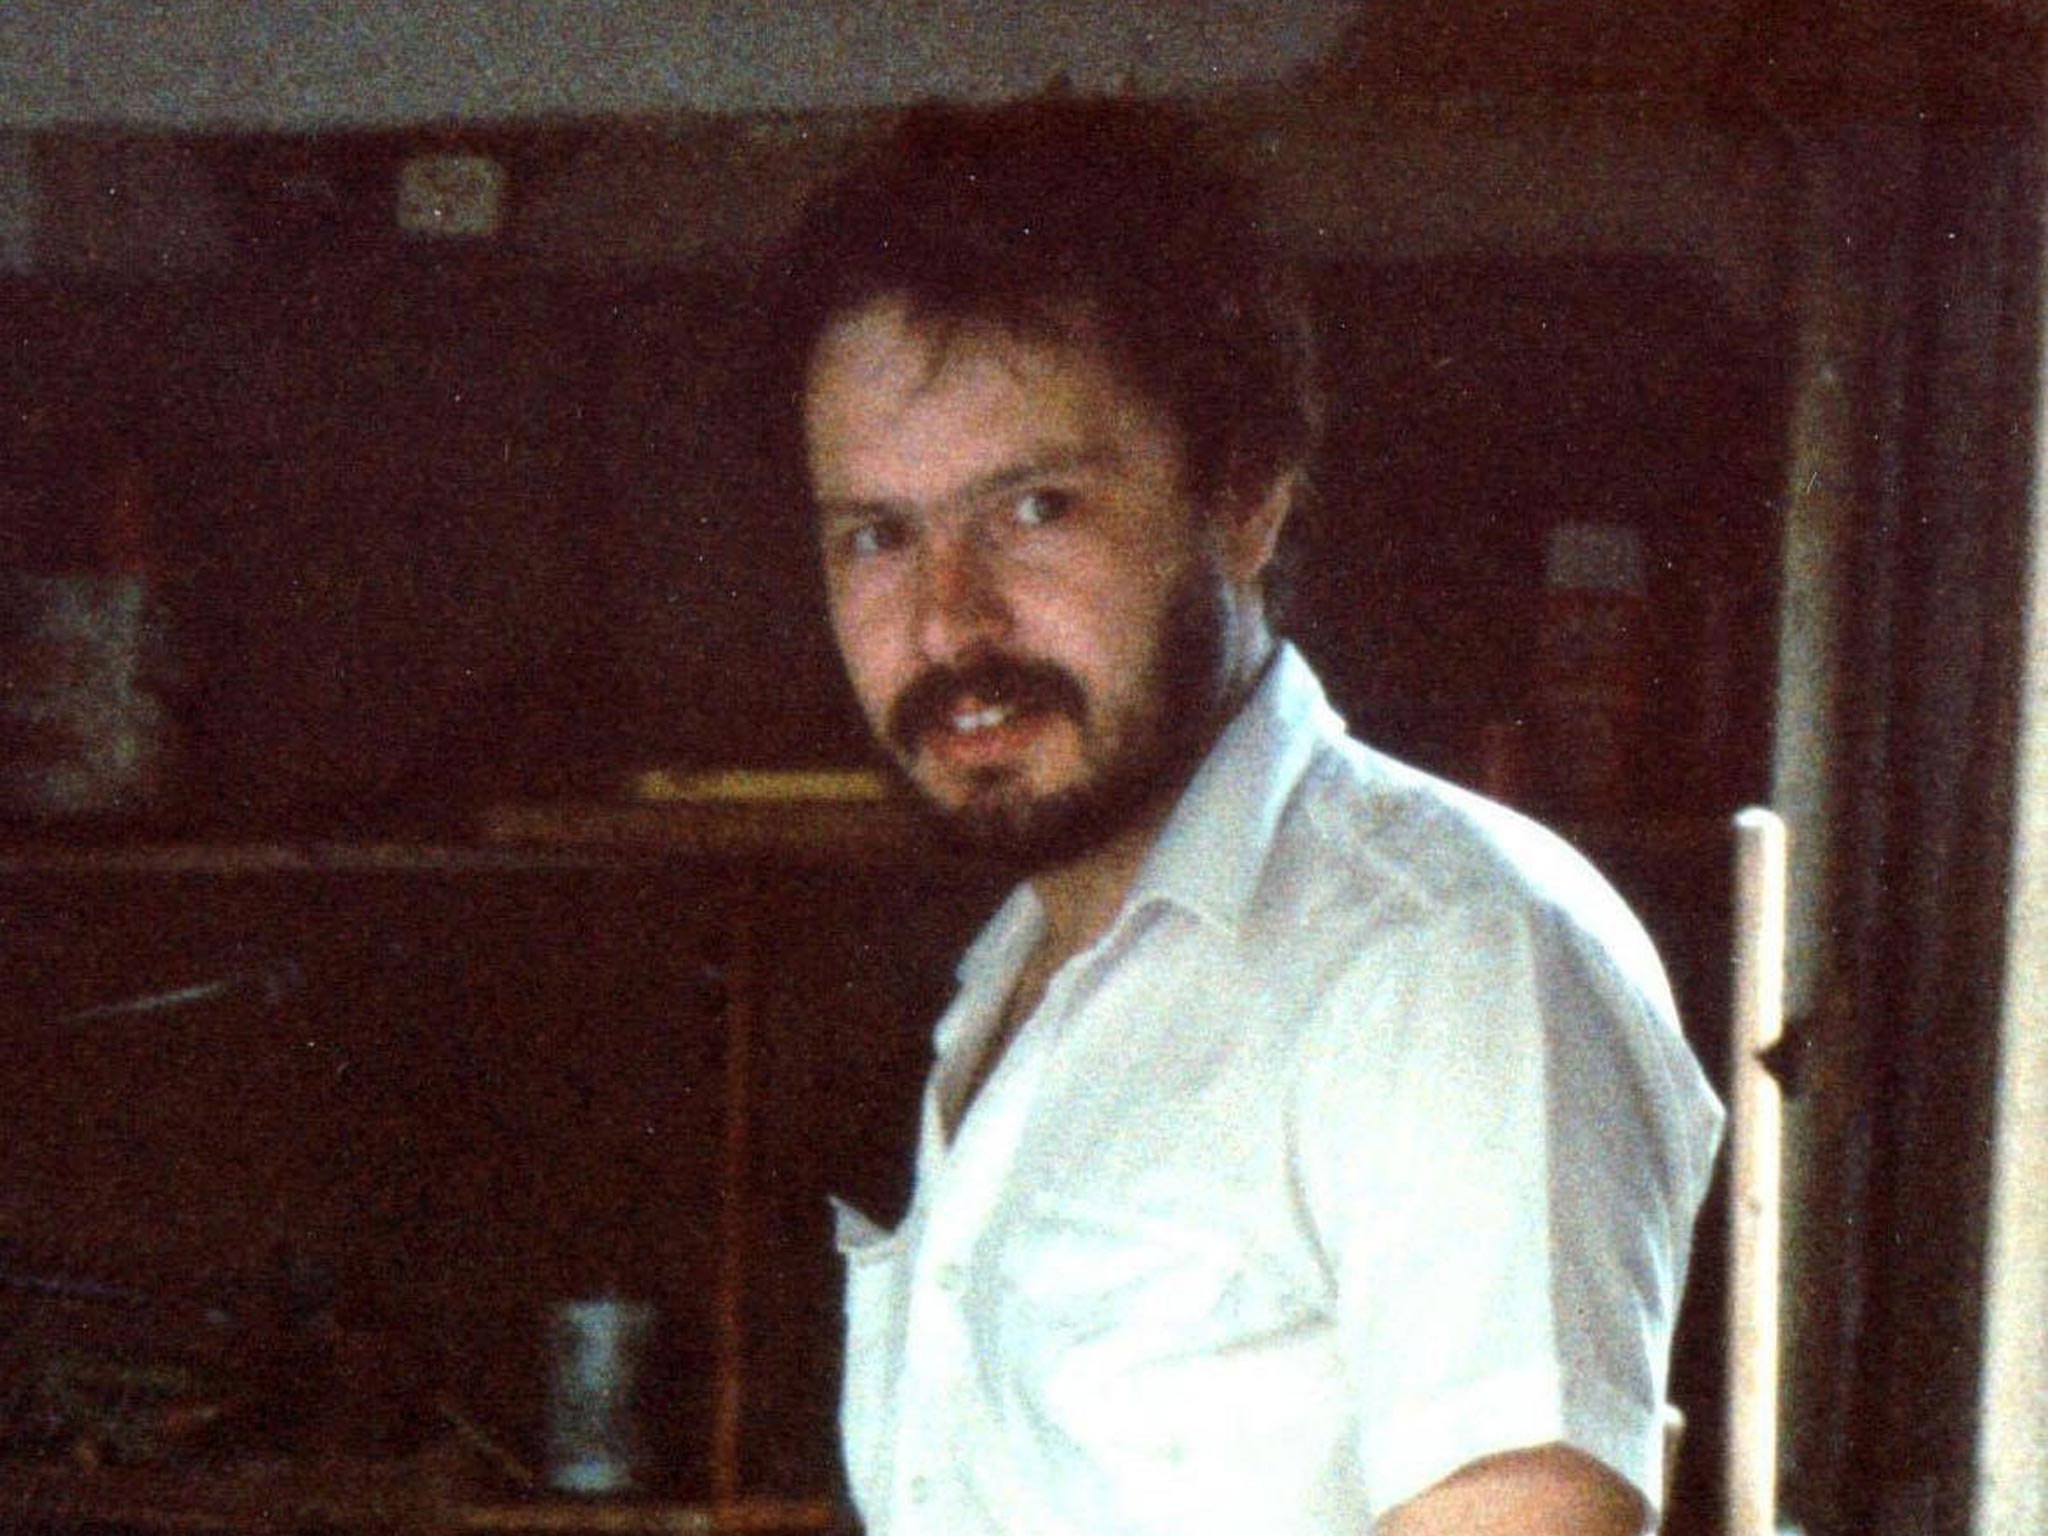 Daniel Morgan, a PI, was found murdered with an axe in his head in a pub car park in 1987